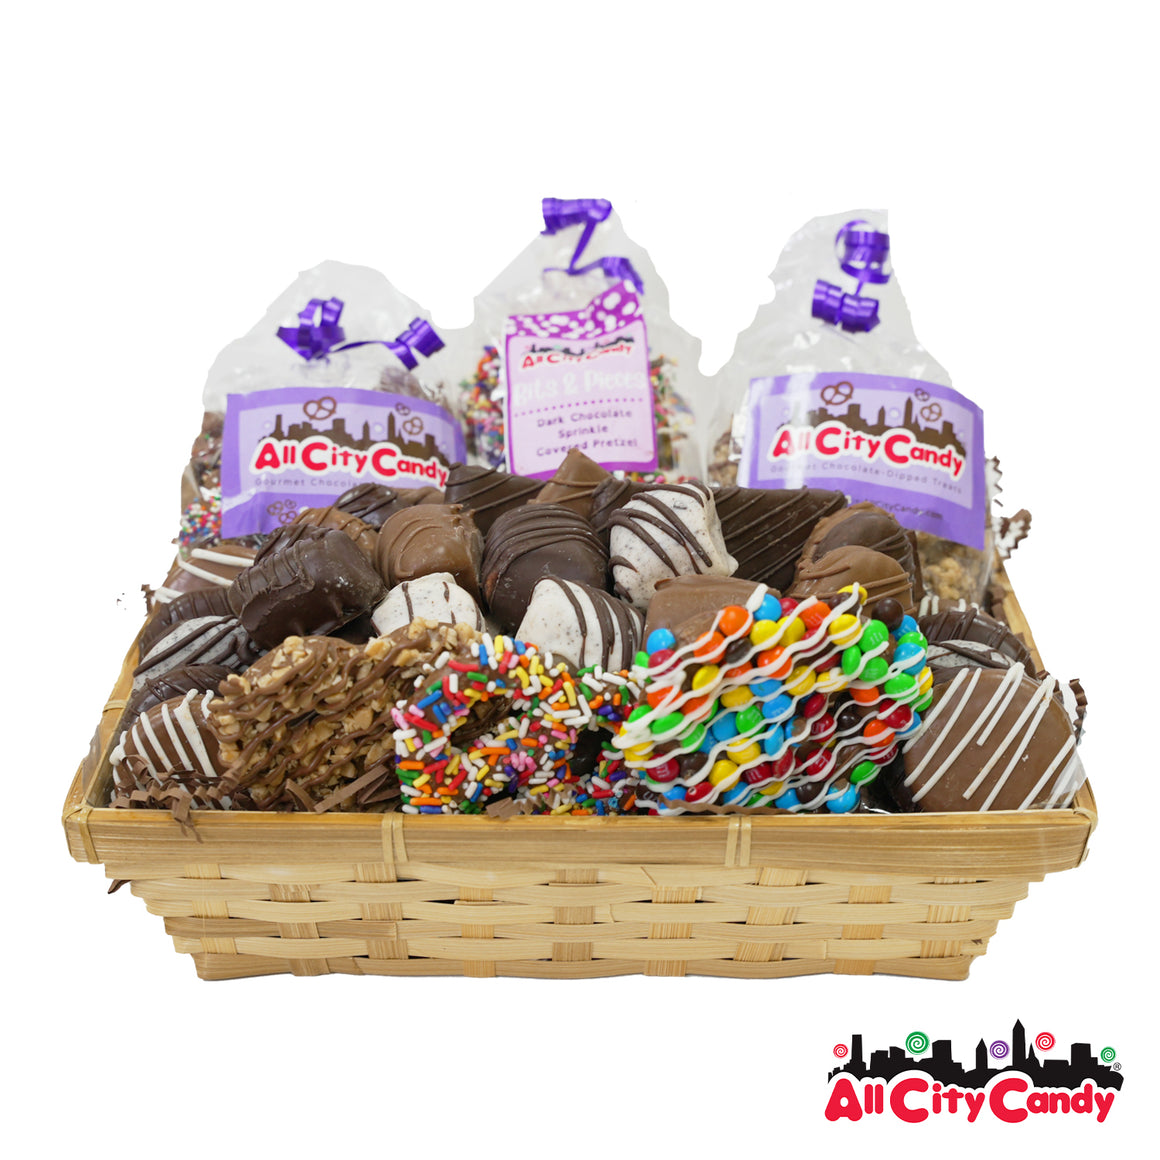 Snack Basket Gourmet Chocolate Covered Treat Gift Basket